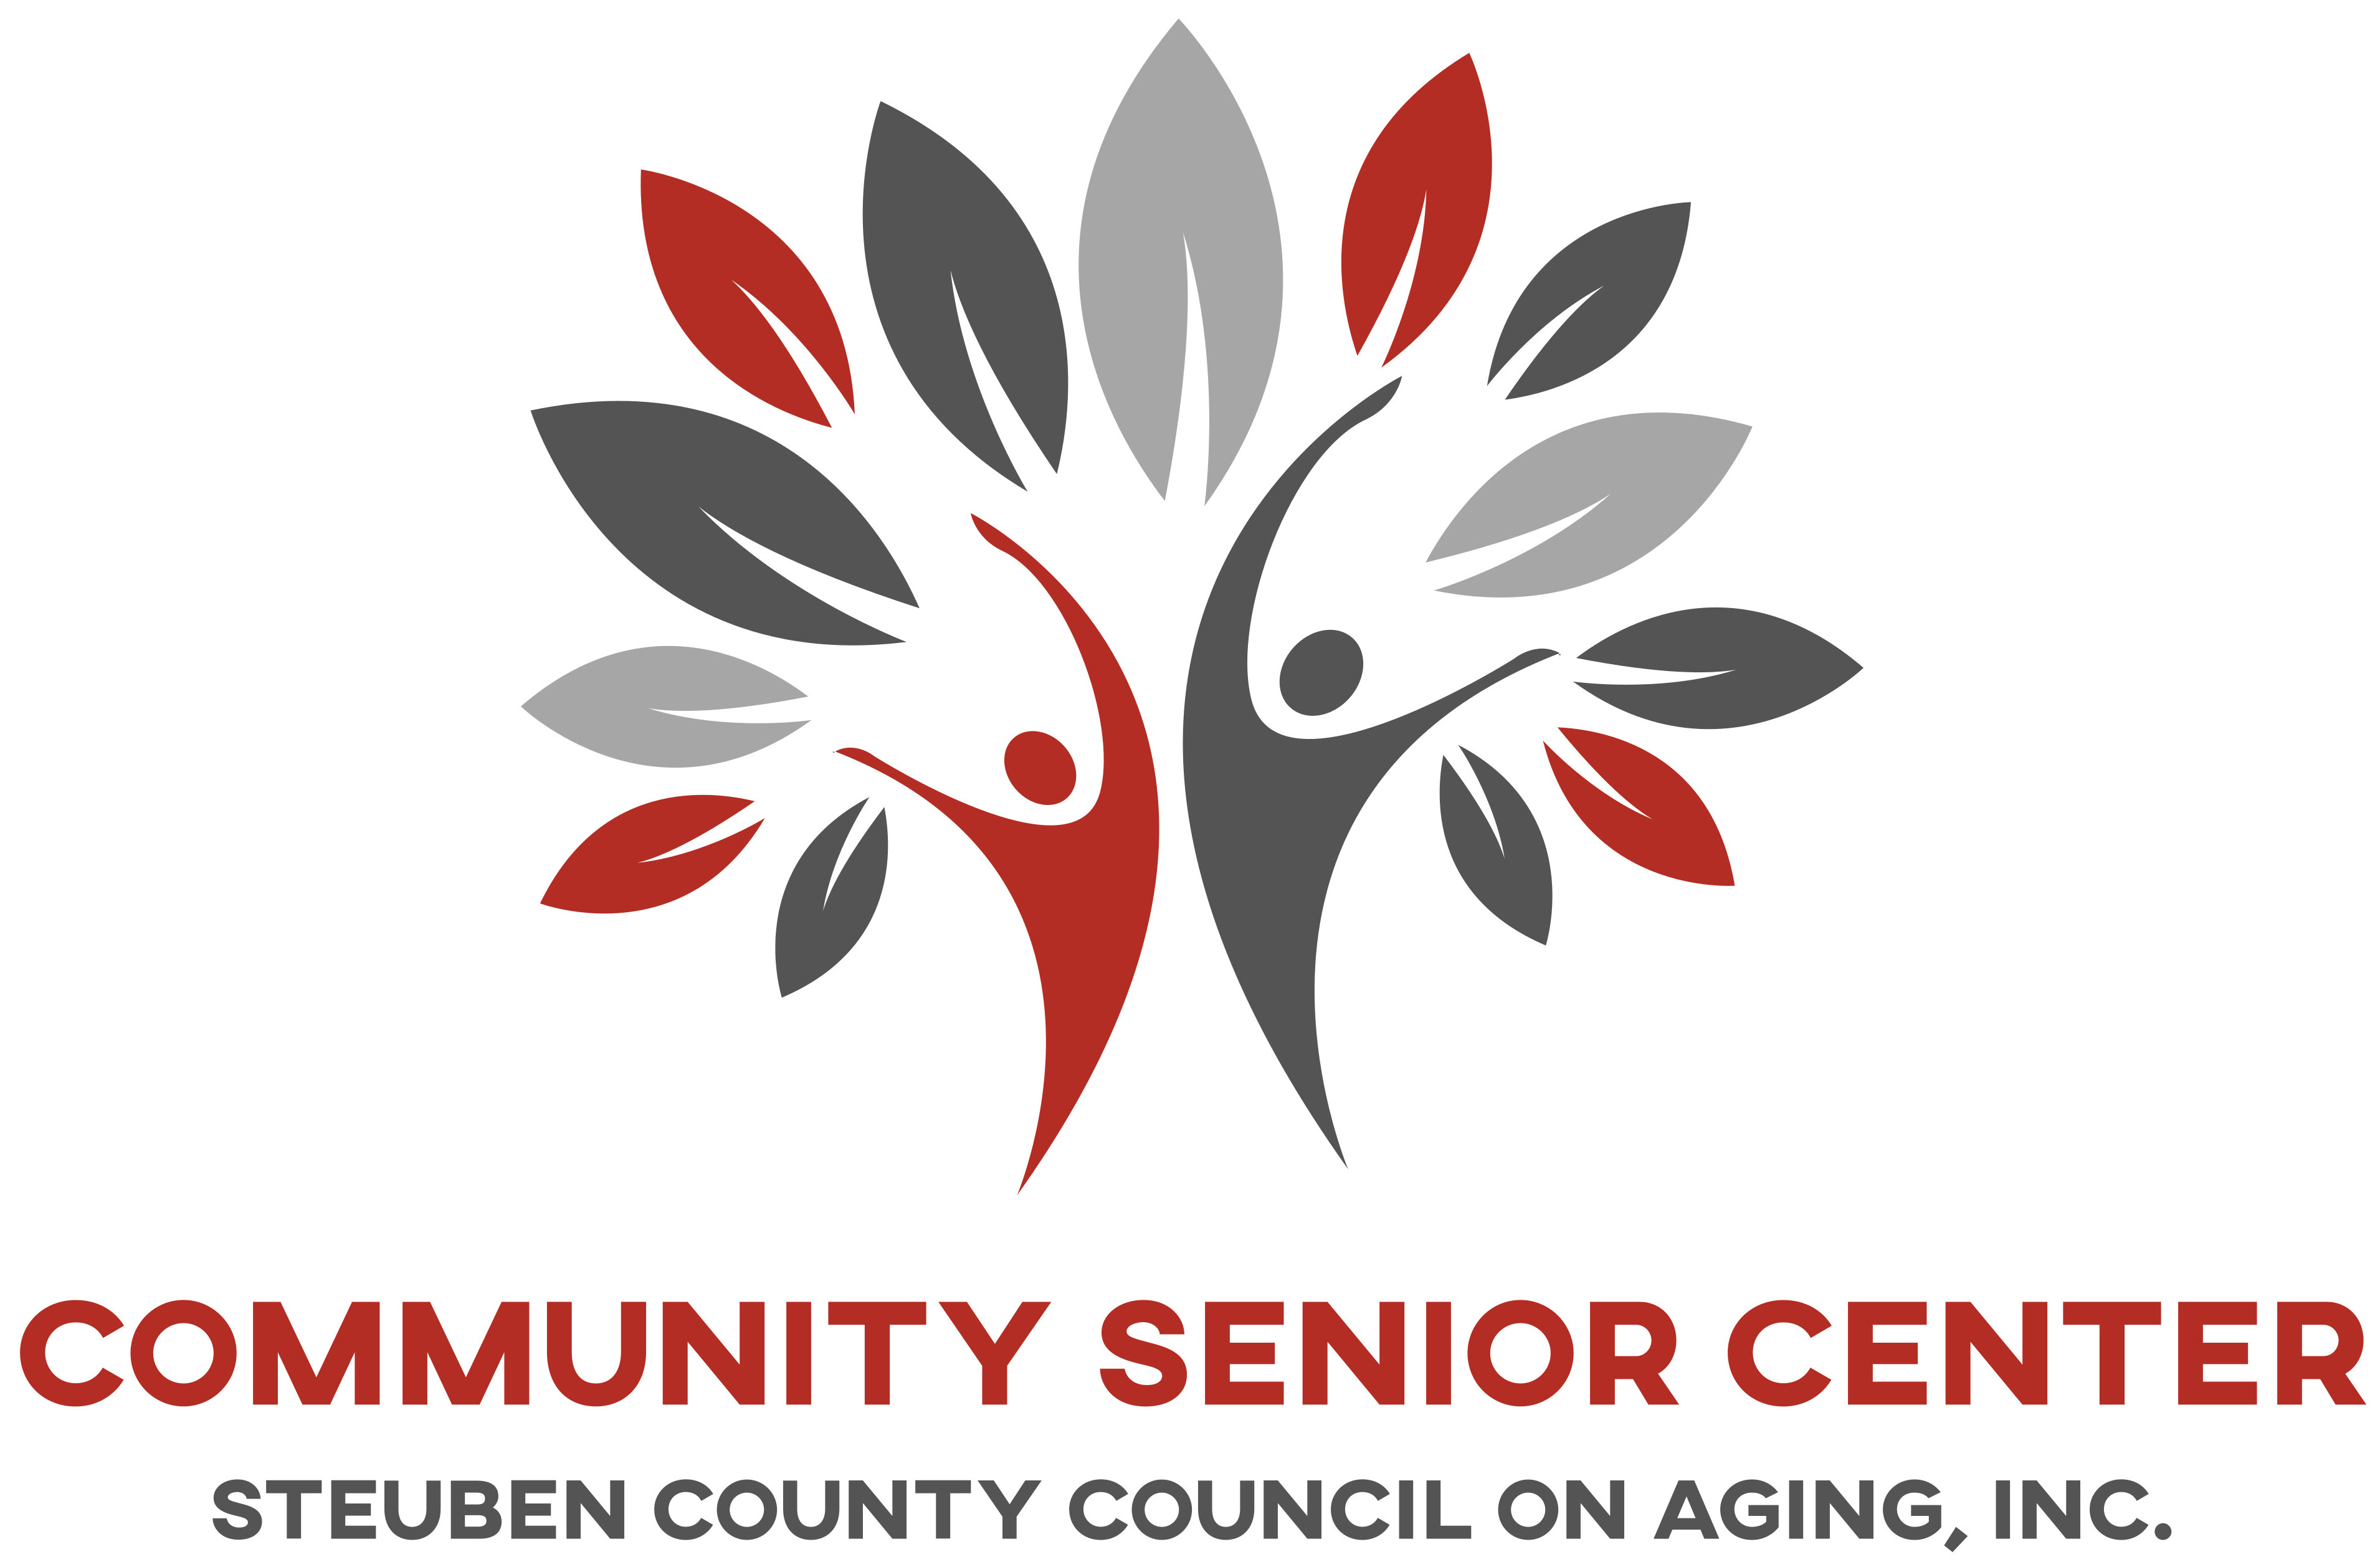 Steuben County Council on Aging, Inc.